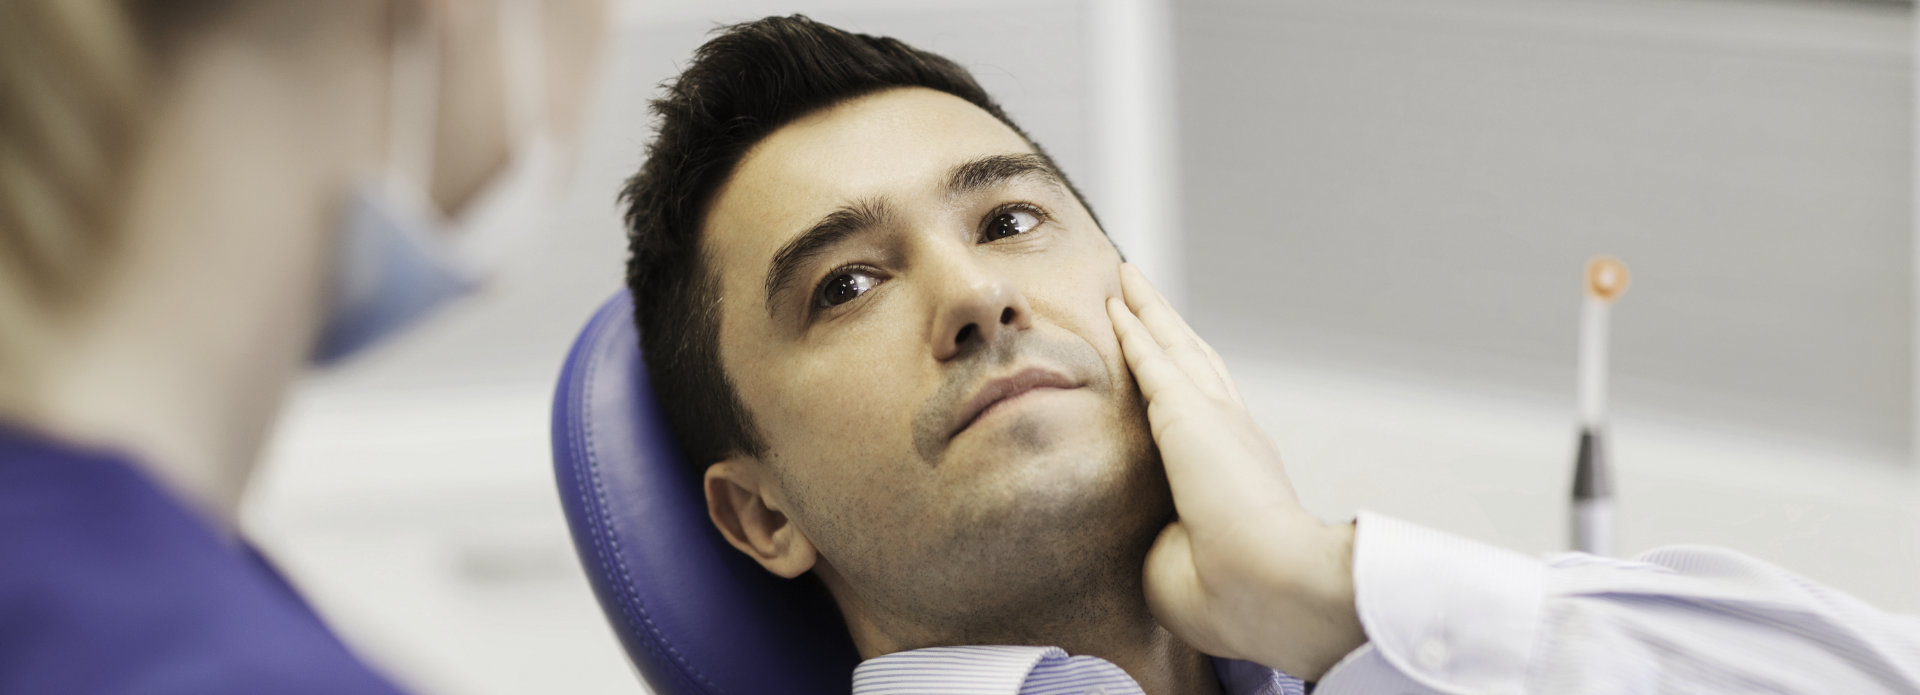 Concerned man in a dental chair discussing cracked tooth repair with a dentist